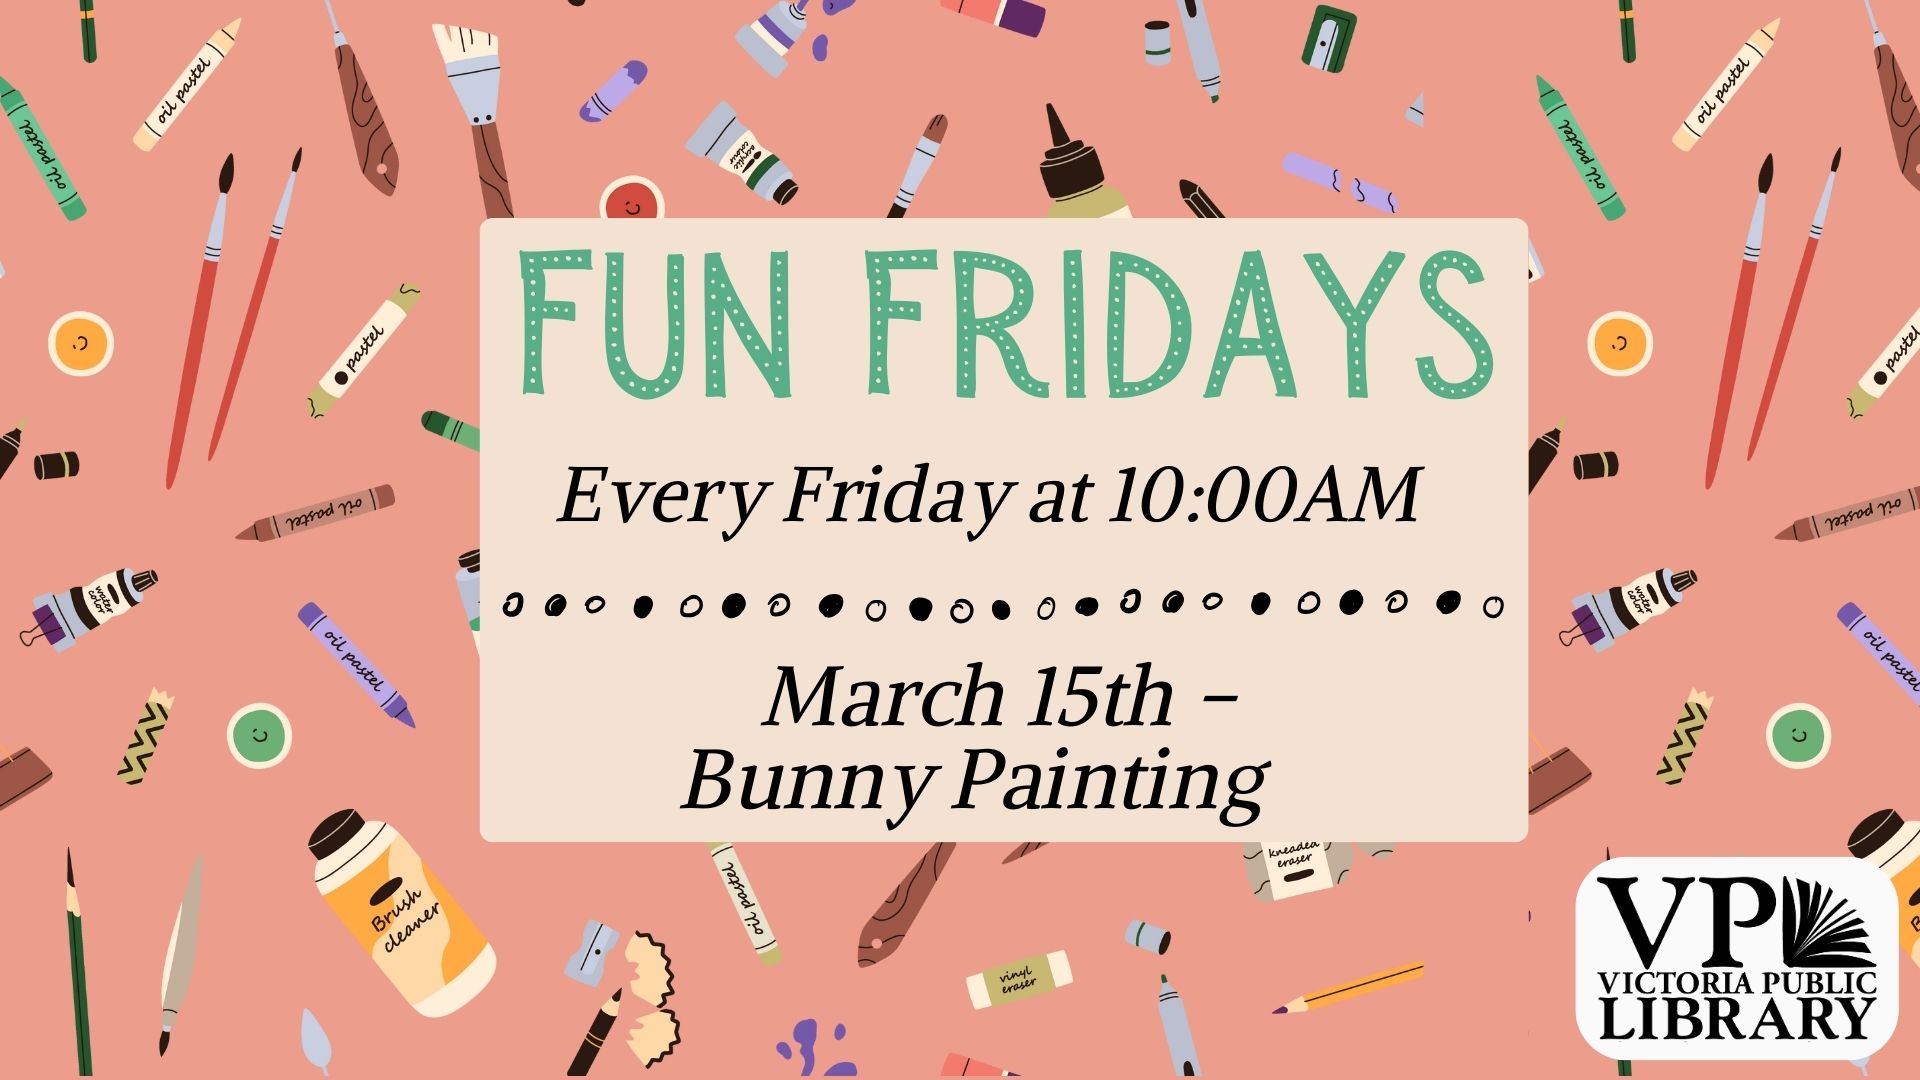 Fun Fridays, activities every Friday morning at 10:00am; Bunny Paintings March 15th